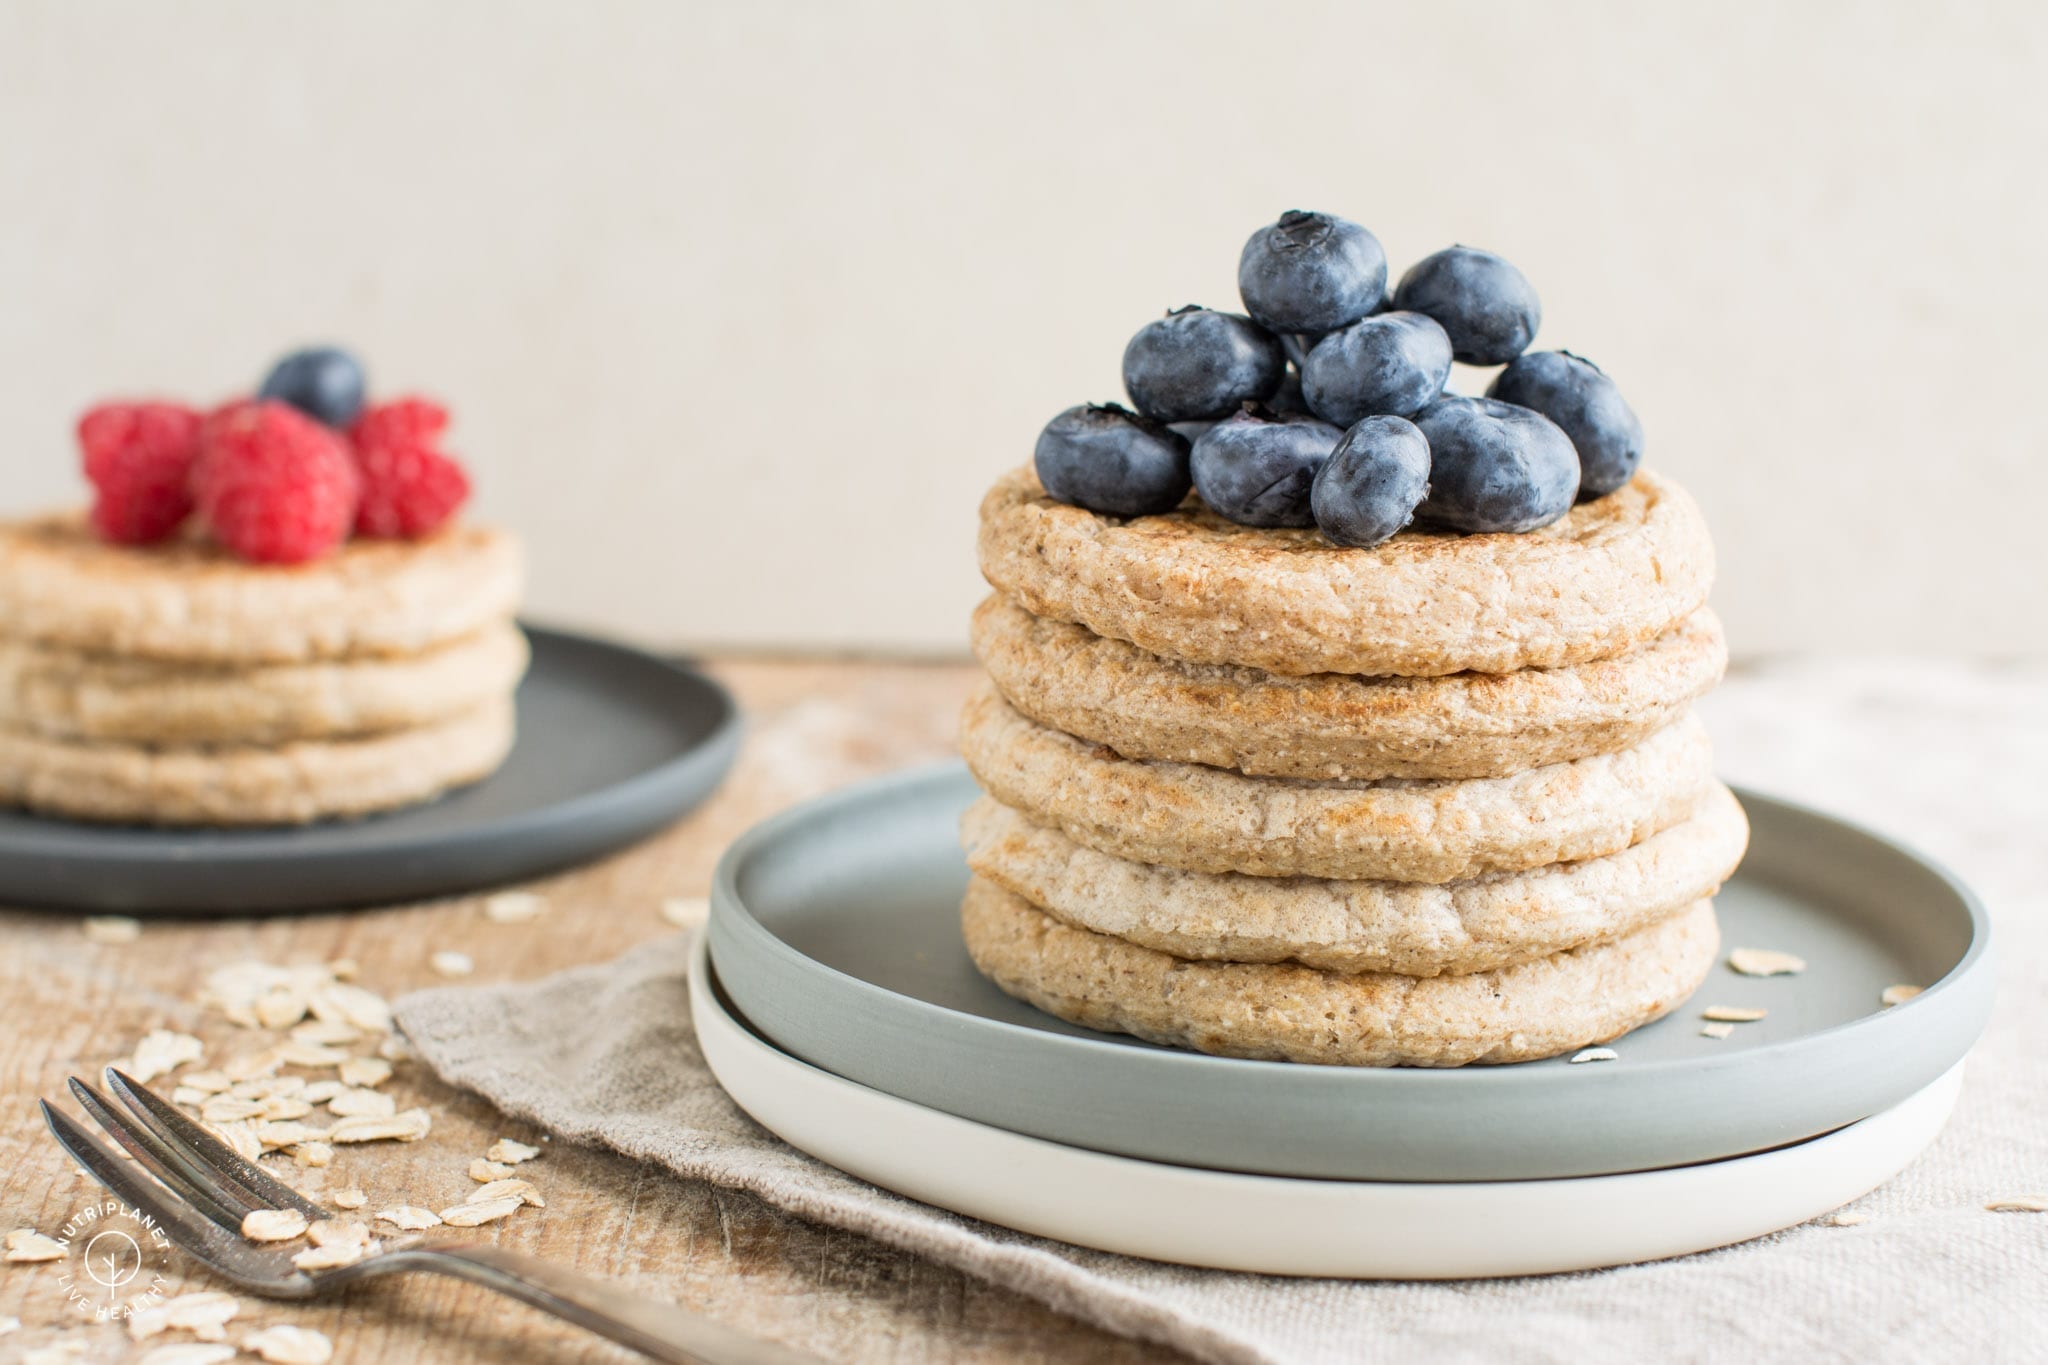 Light and fluffy vegan oatmeal pancakes with coconut flour